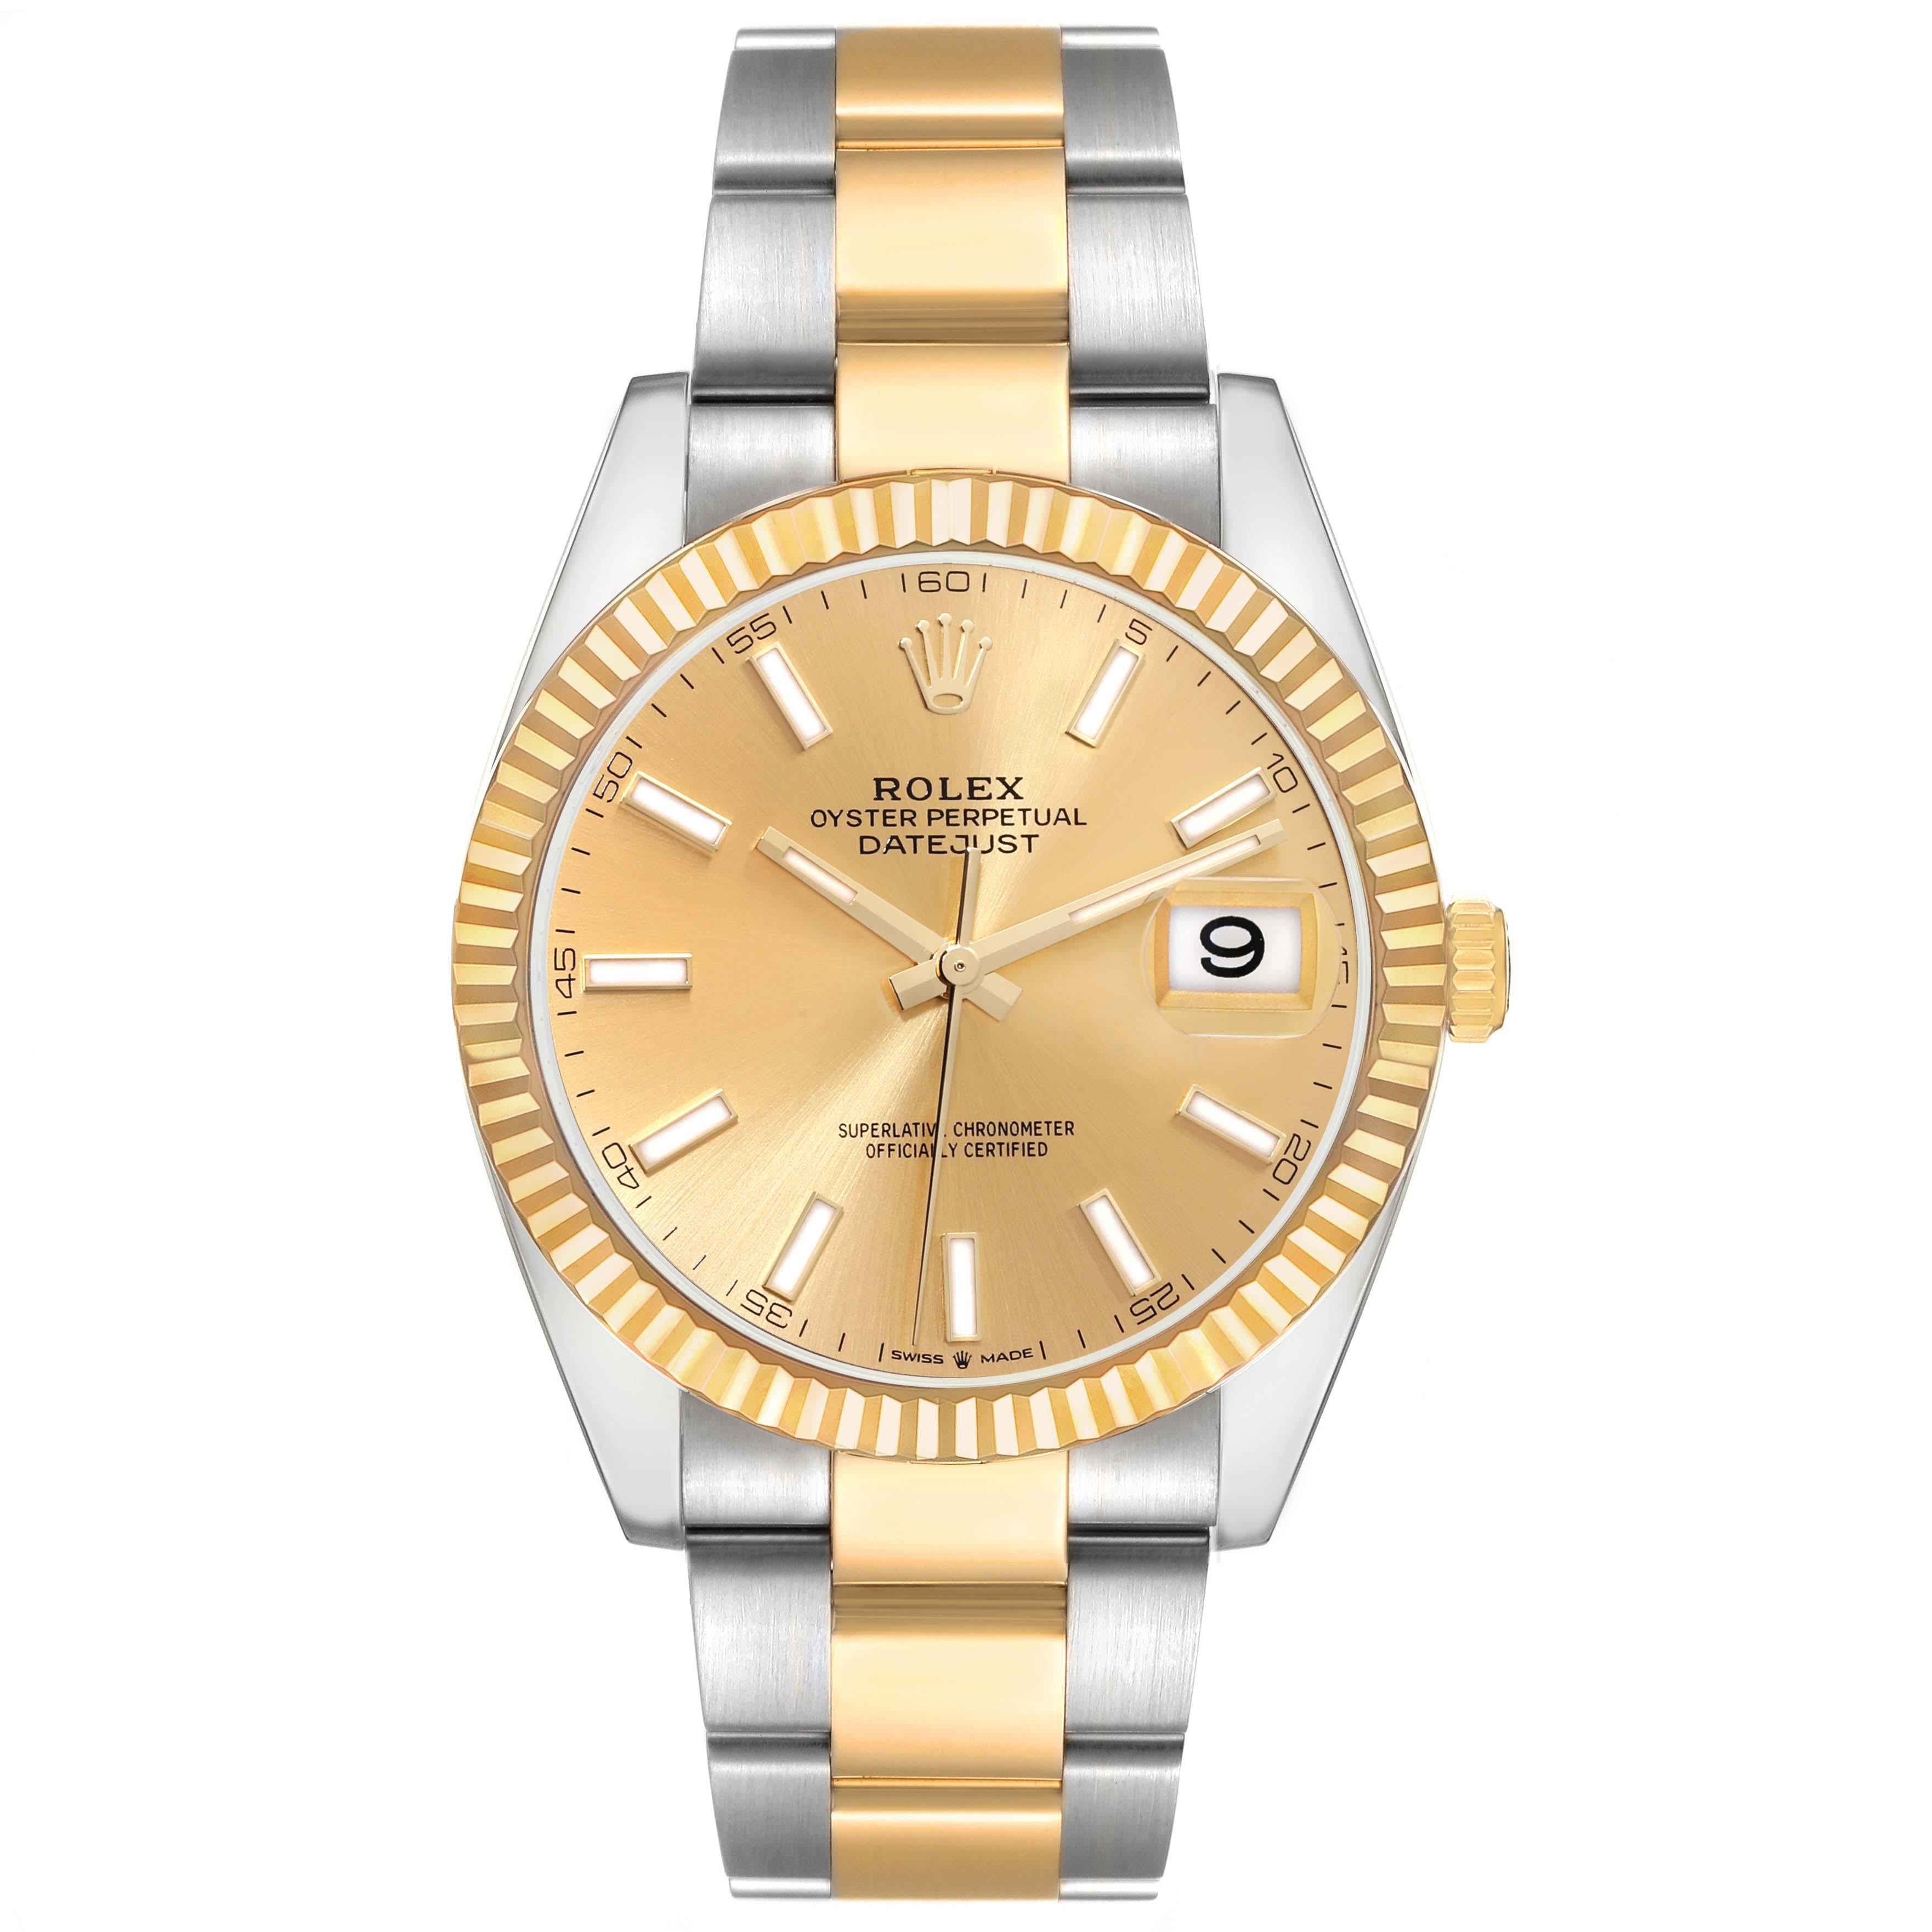 Rolex Datejust 41 Steel Yellow Gold Champagne Dial Mens Watch 126333 Unworn. Officially certified chronometer automatic self-winding movement with quickset date. Stainless steel and 18K yellow gold case 41 mm in diameter. High polished lugs. Rolex